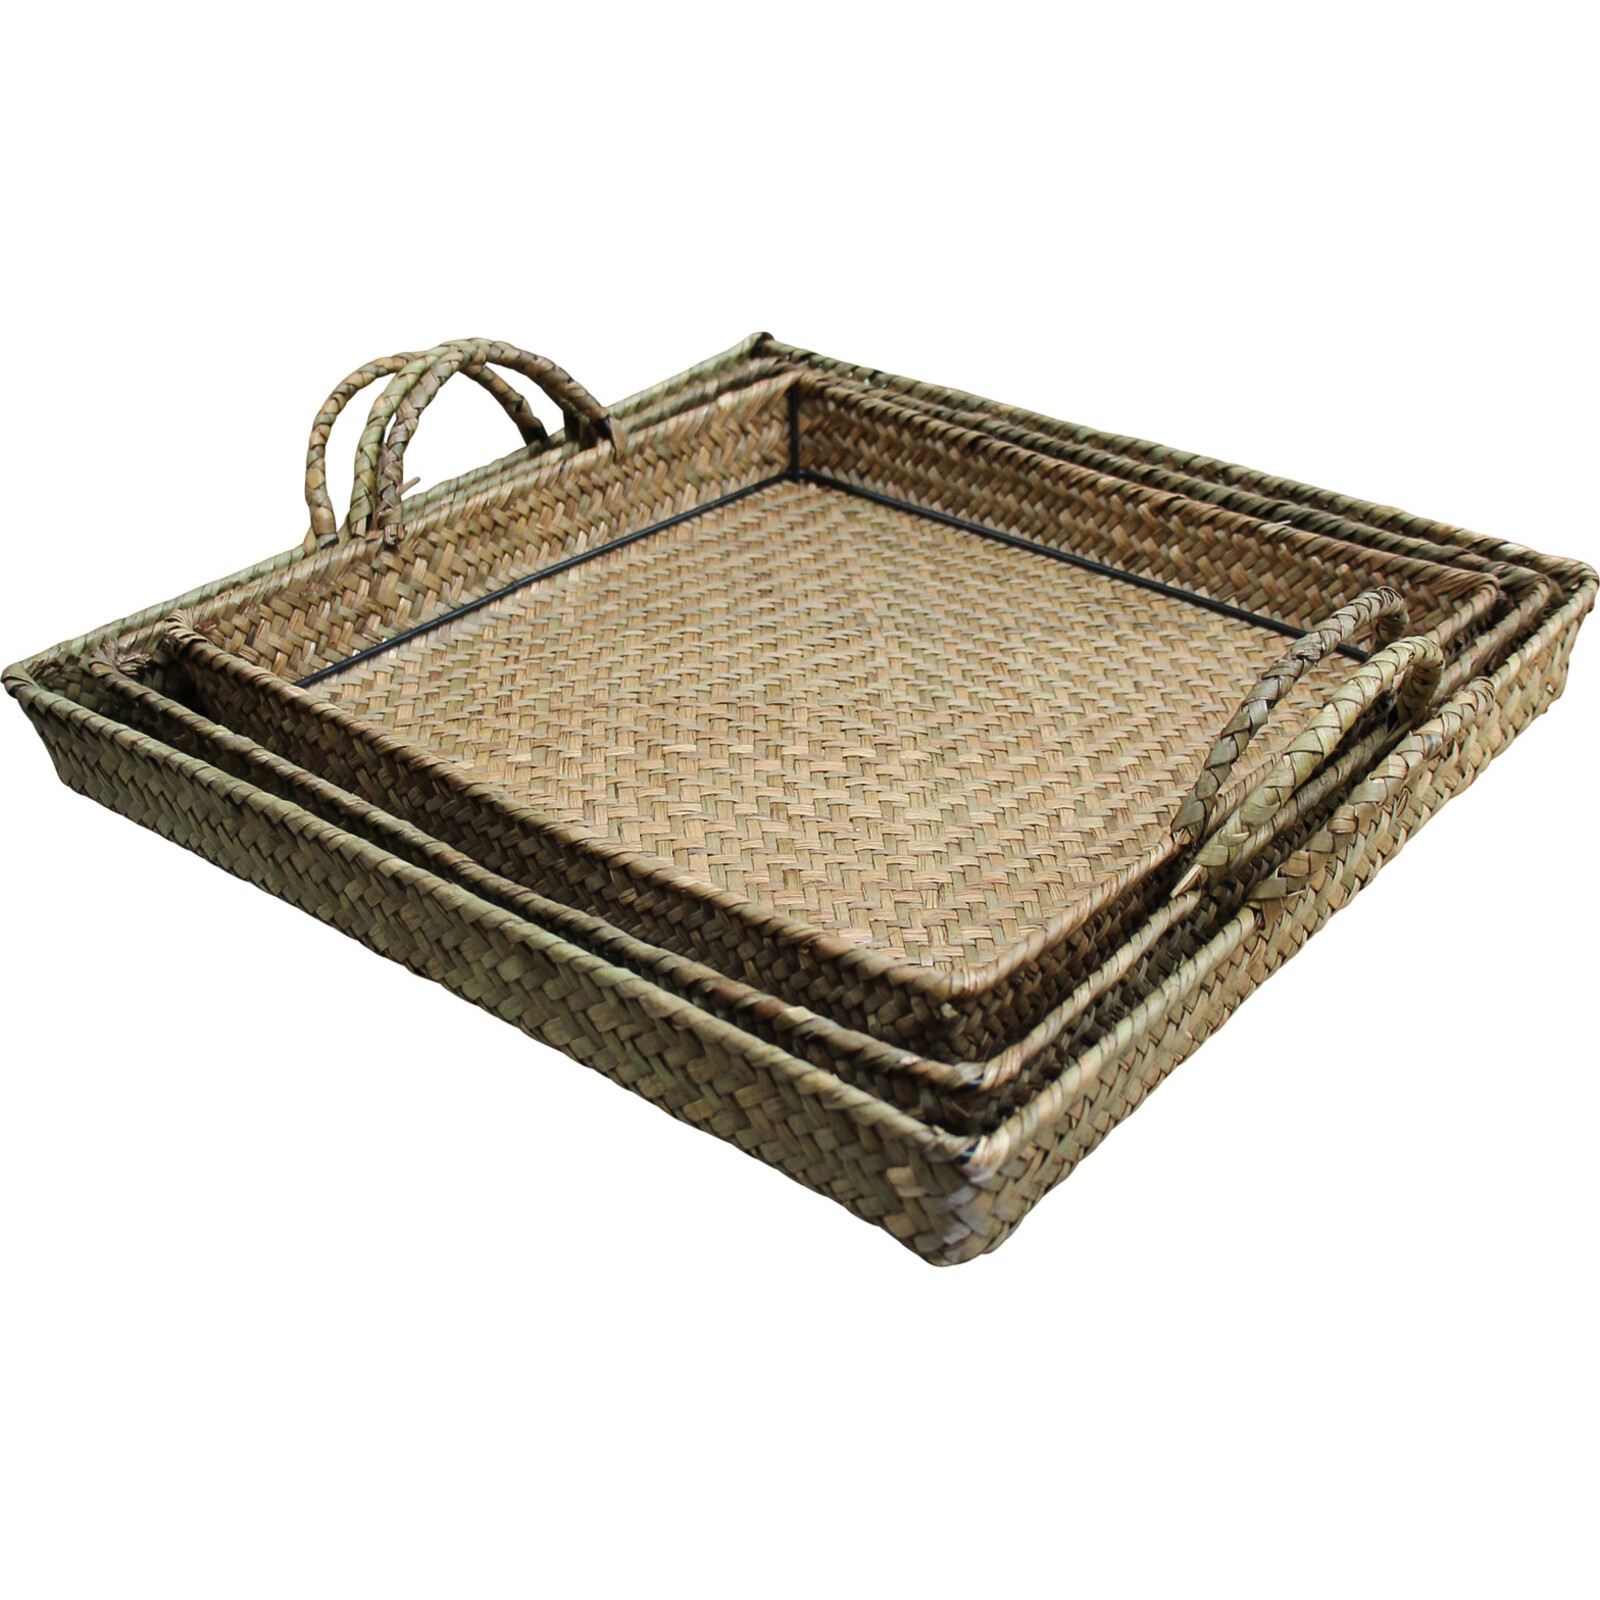 Woven Tray S/3 Natural